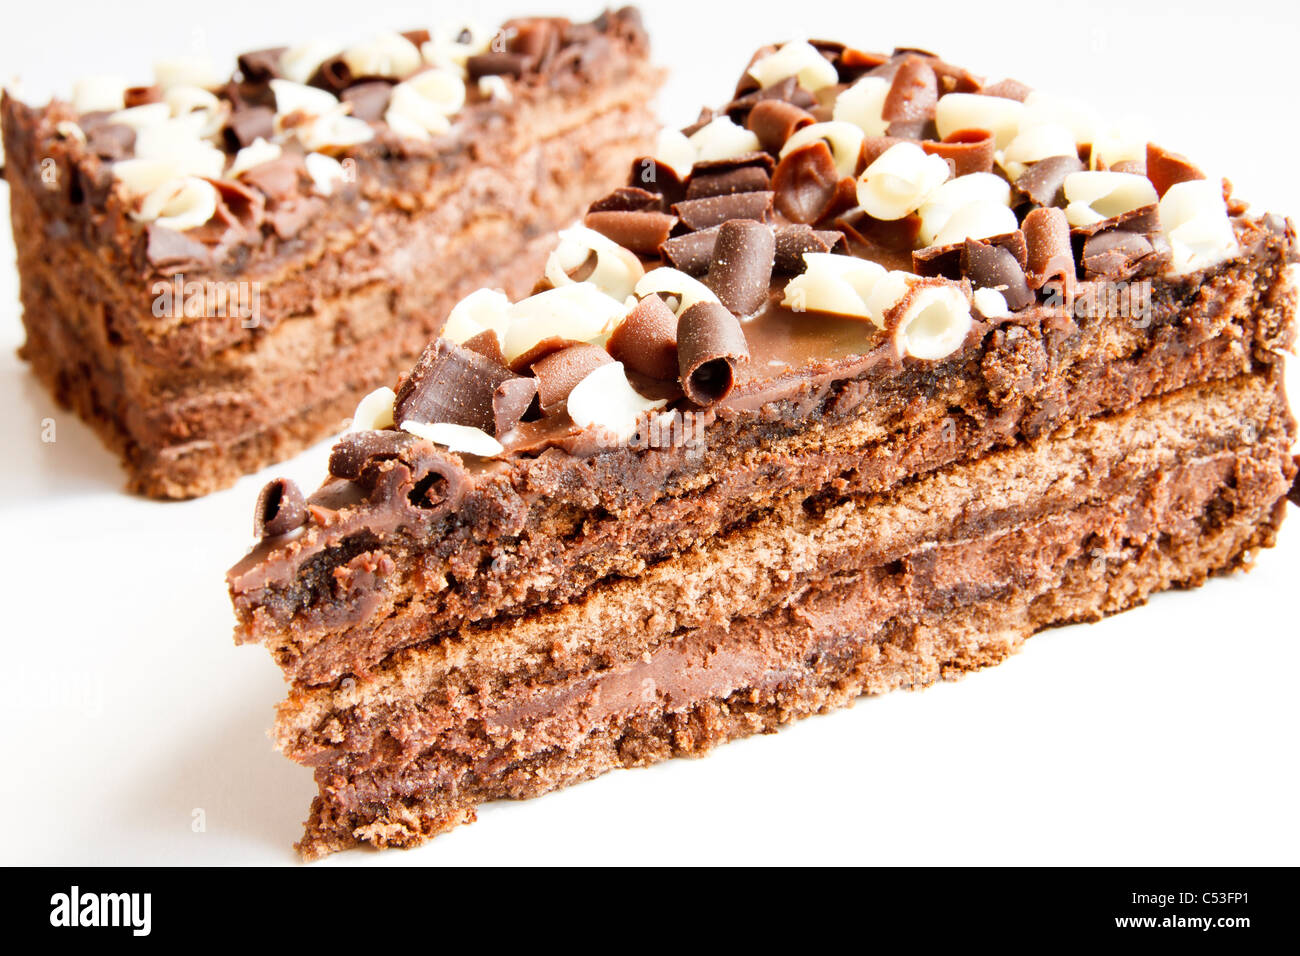 chocolate cake with cocoa and coffee beans Stock Photo